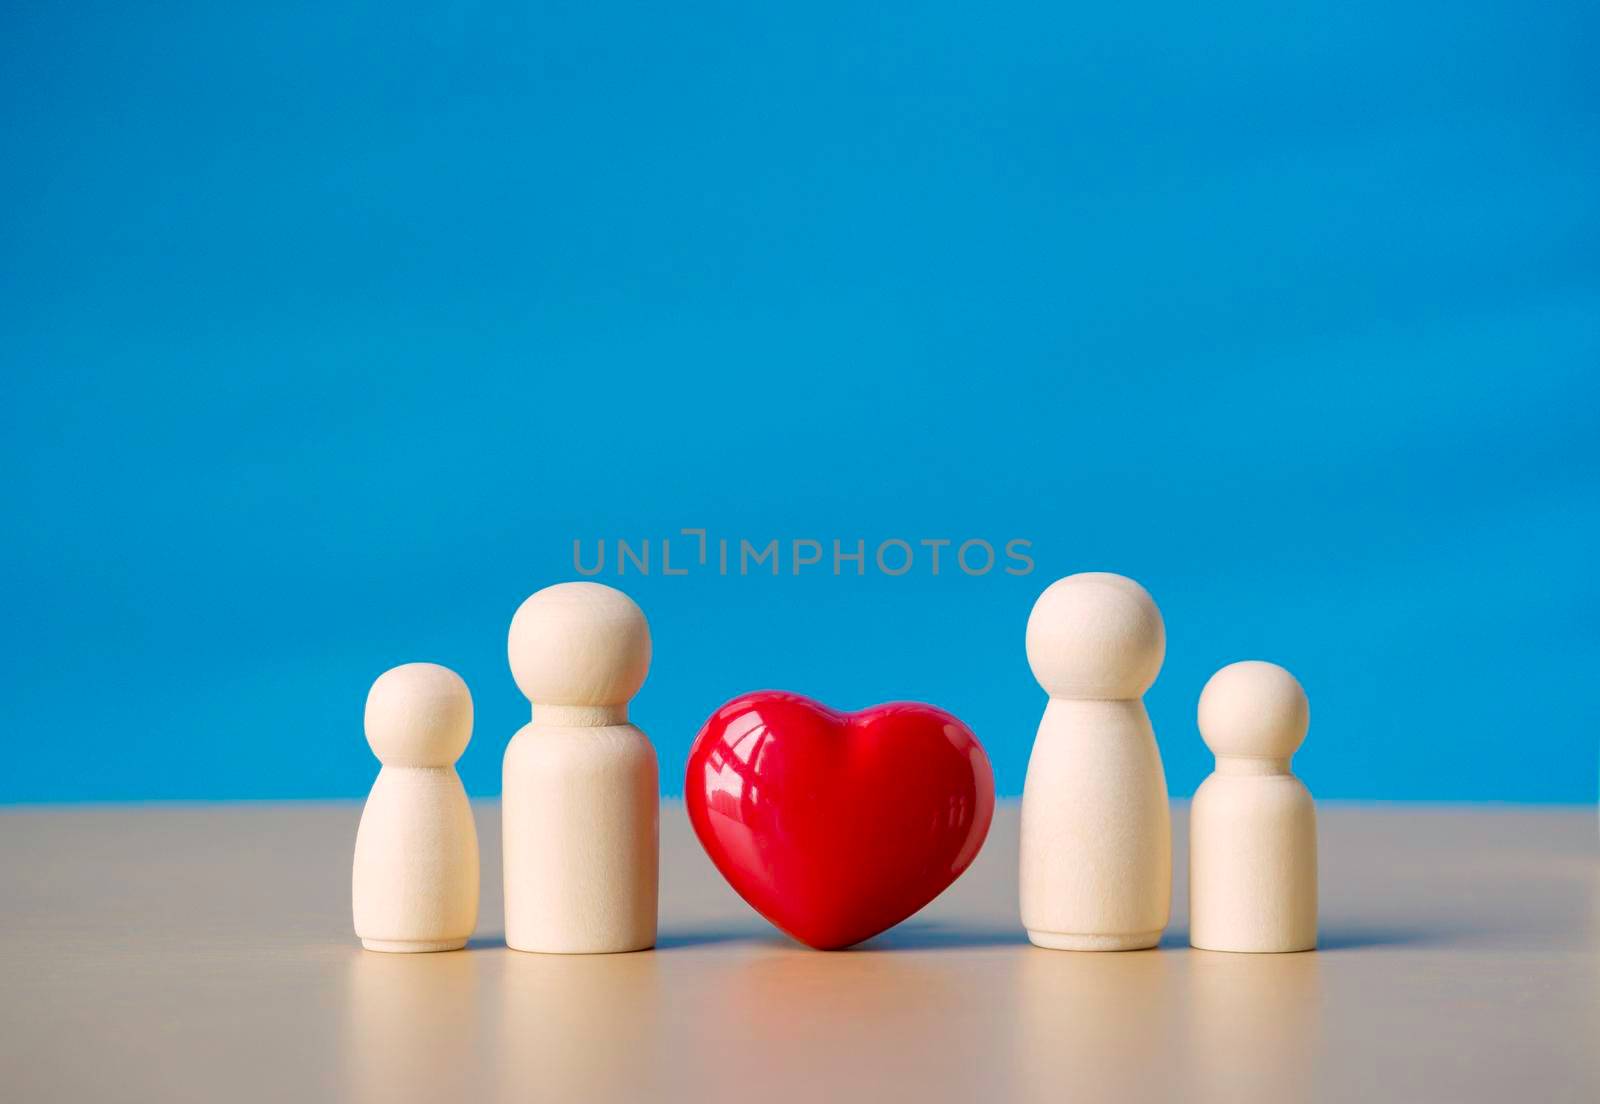 Family wooden figure standing near red heart symbol. Concept of love of relationship family, couple life and happiness with blue background.